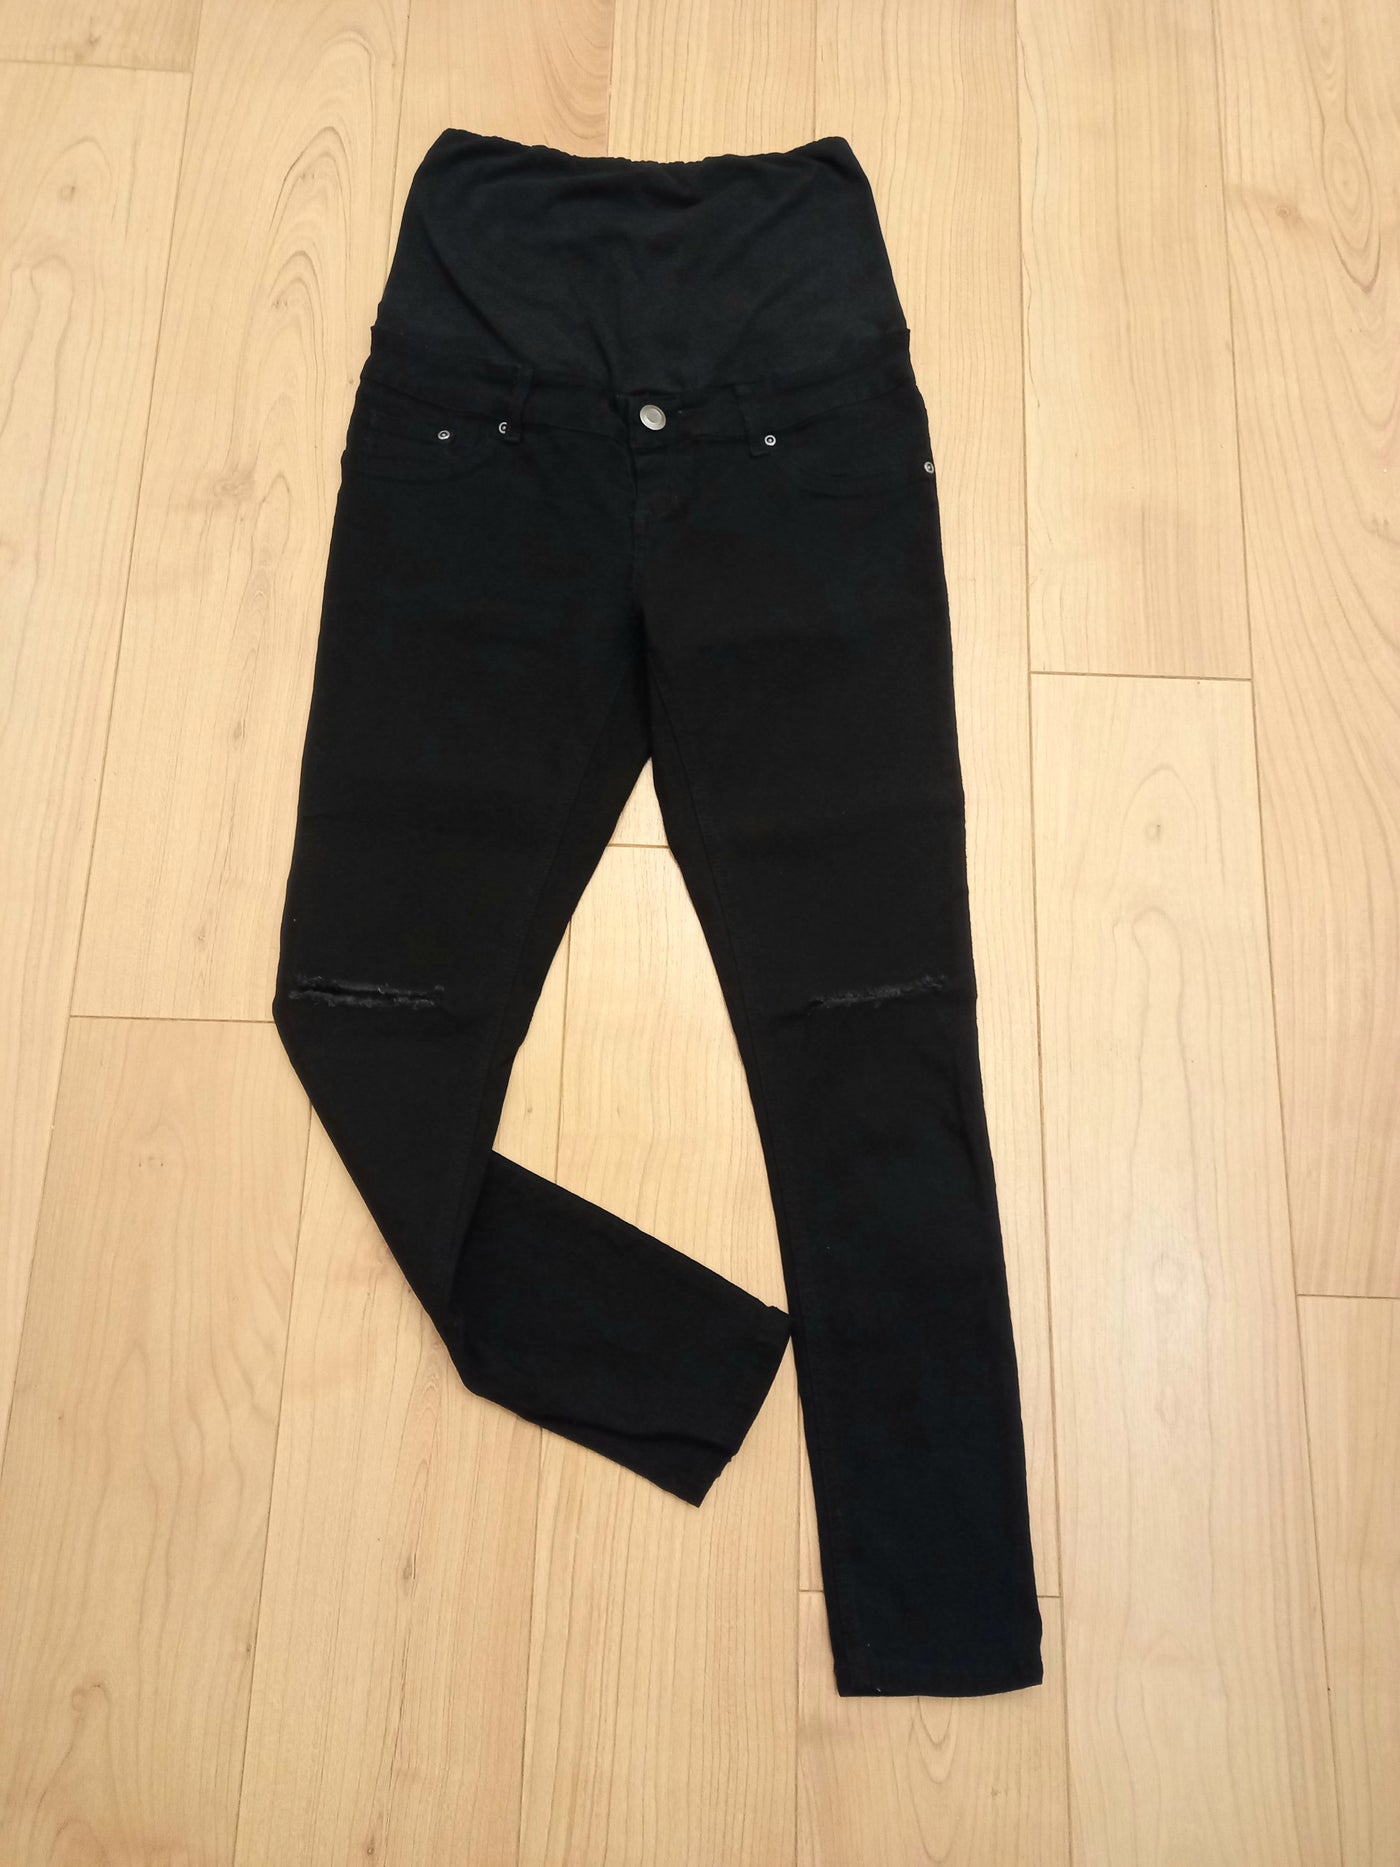 Boohoo Maternity black overbump jeans with ripped knees - Size 10